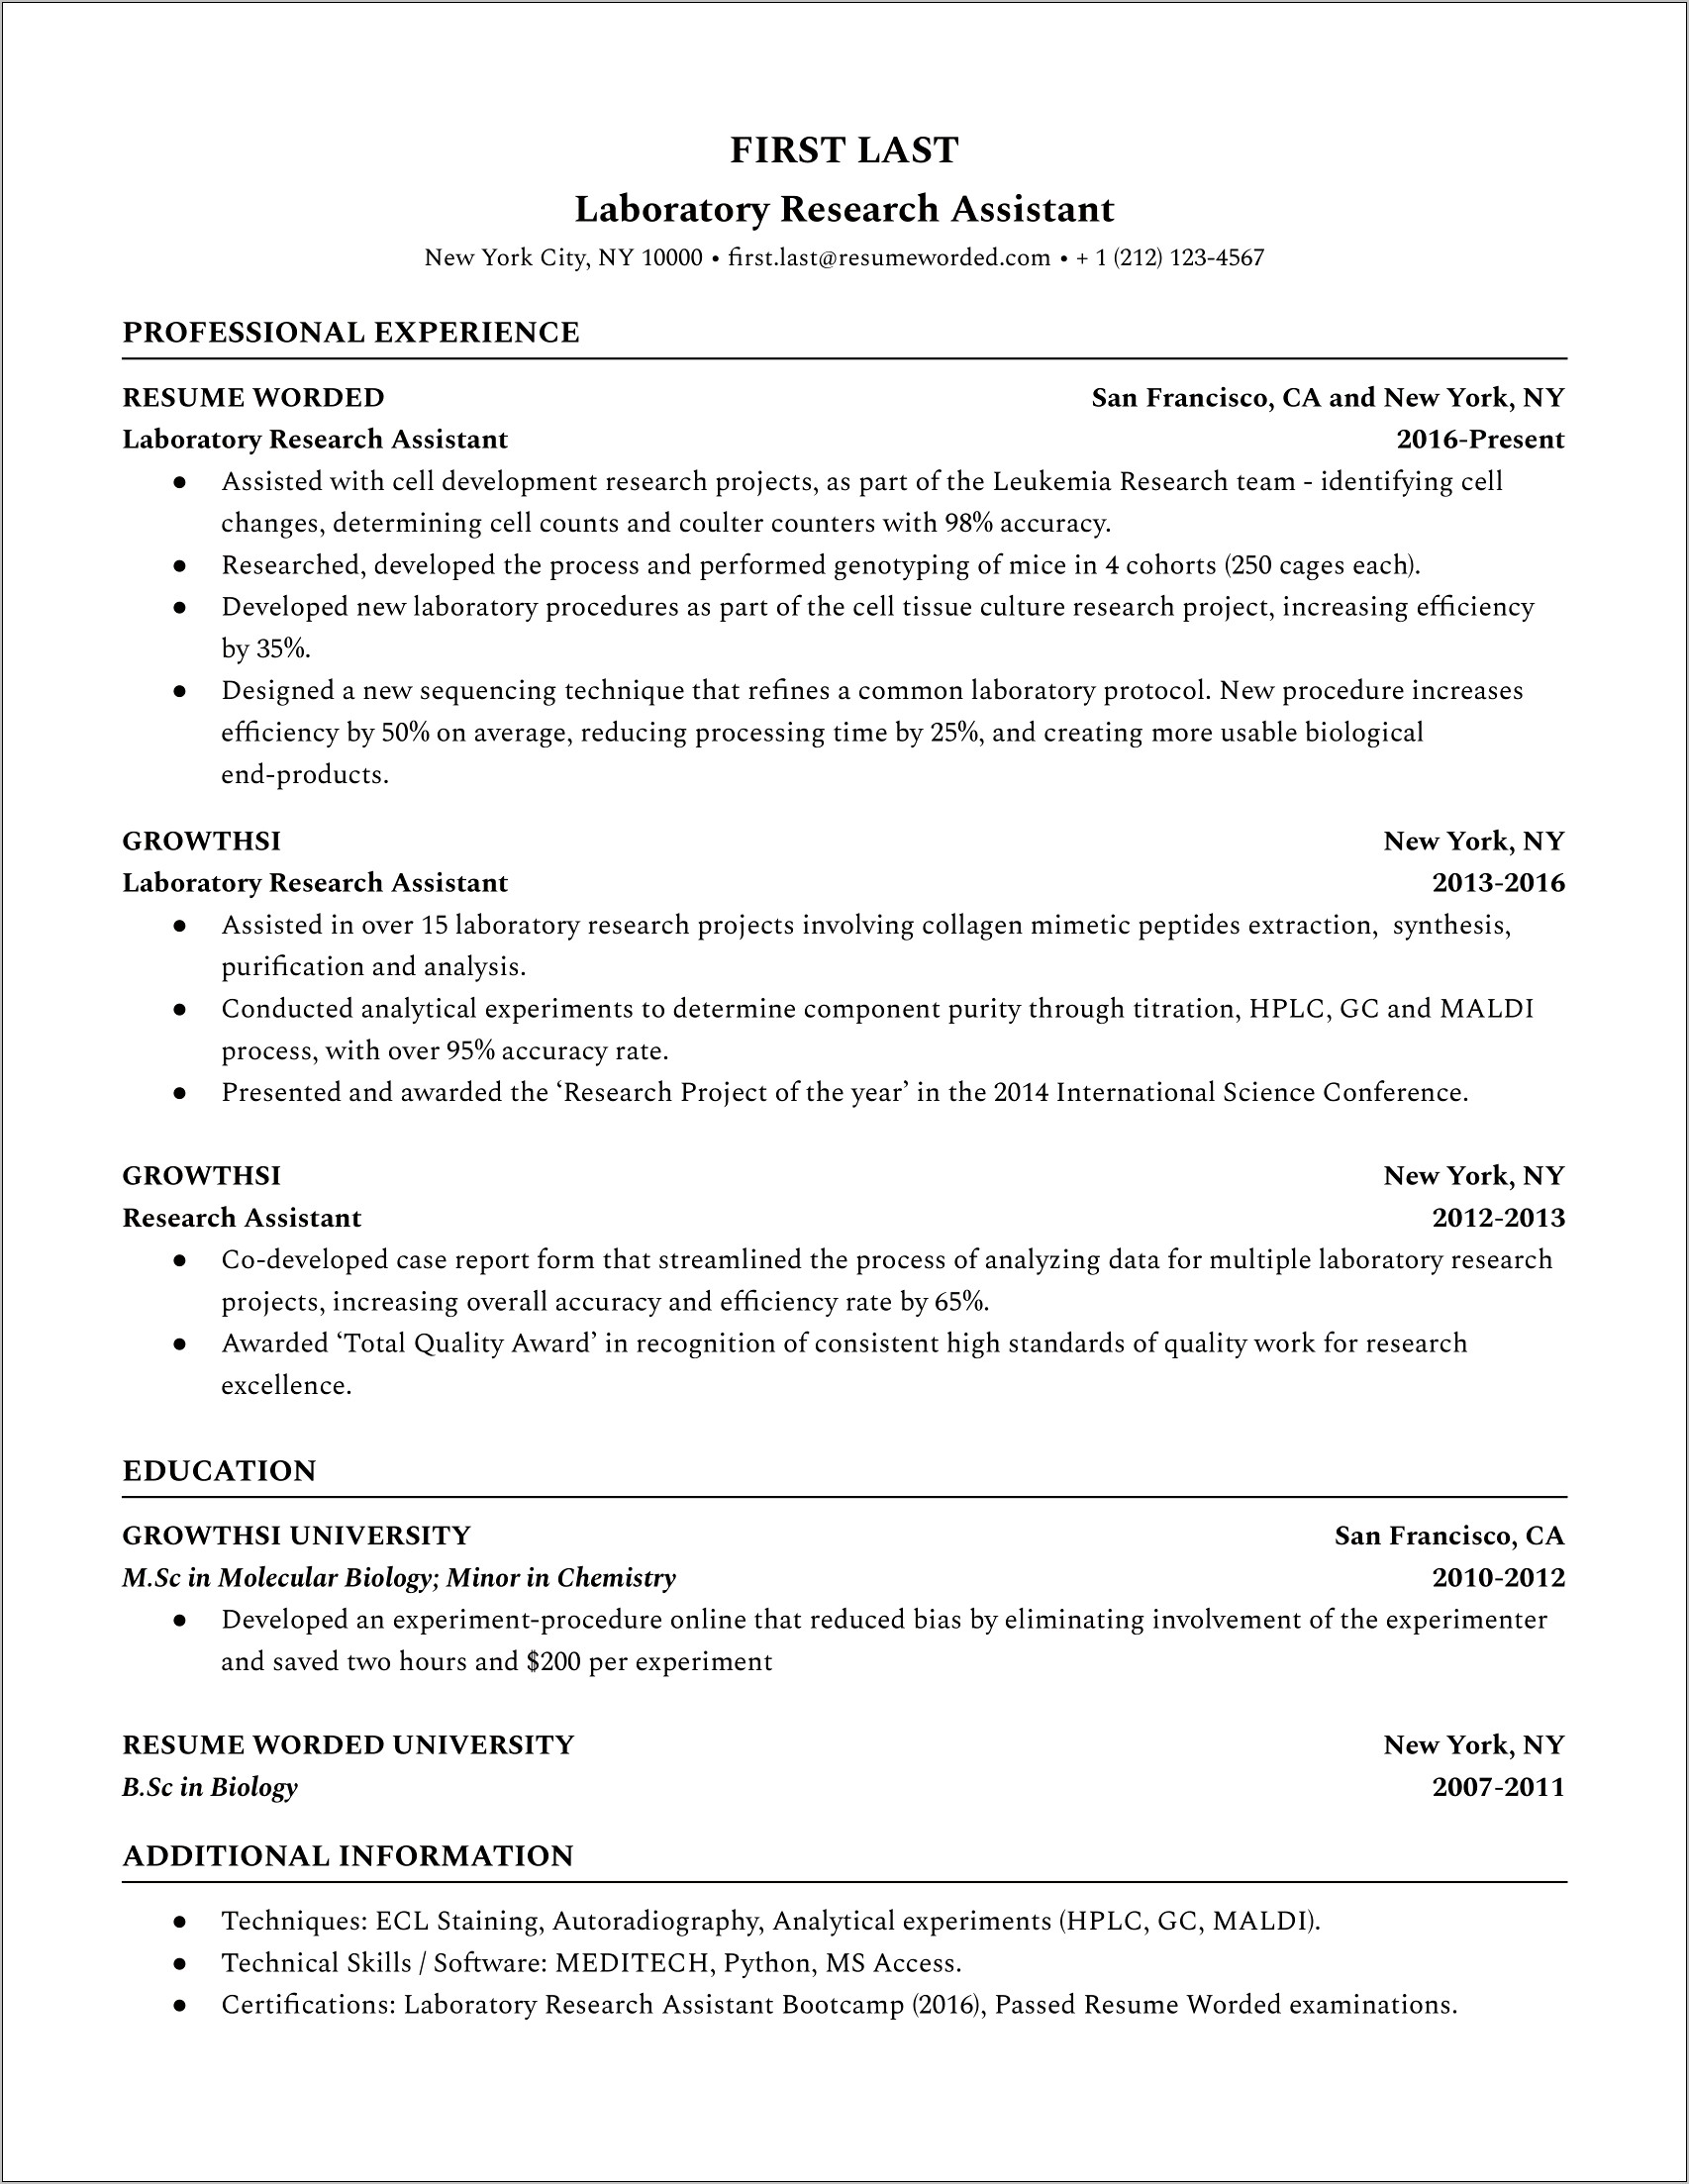 Resume For Lab Assistant No Experience